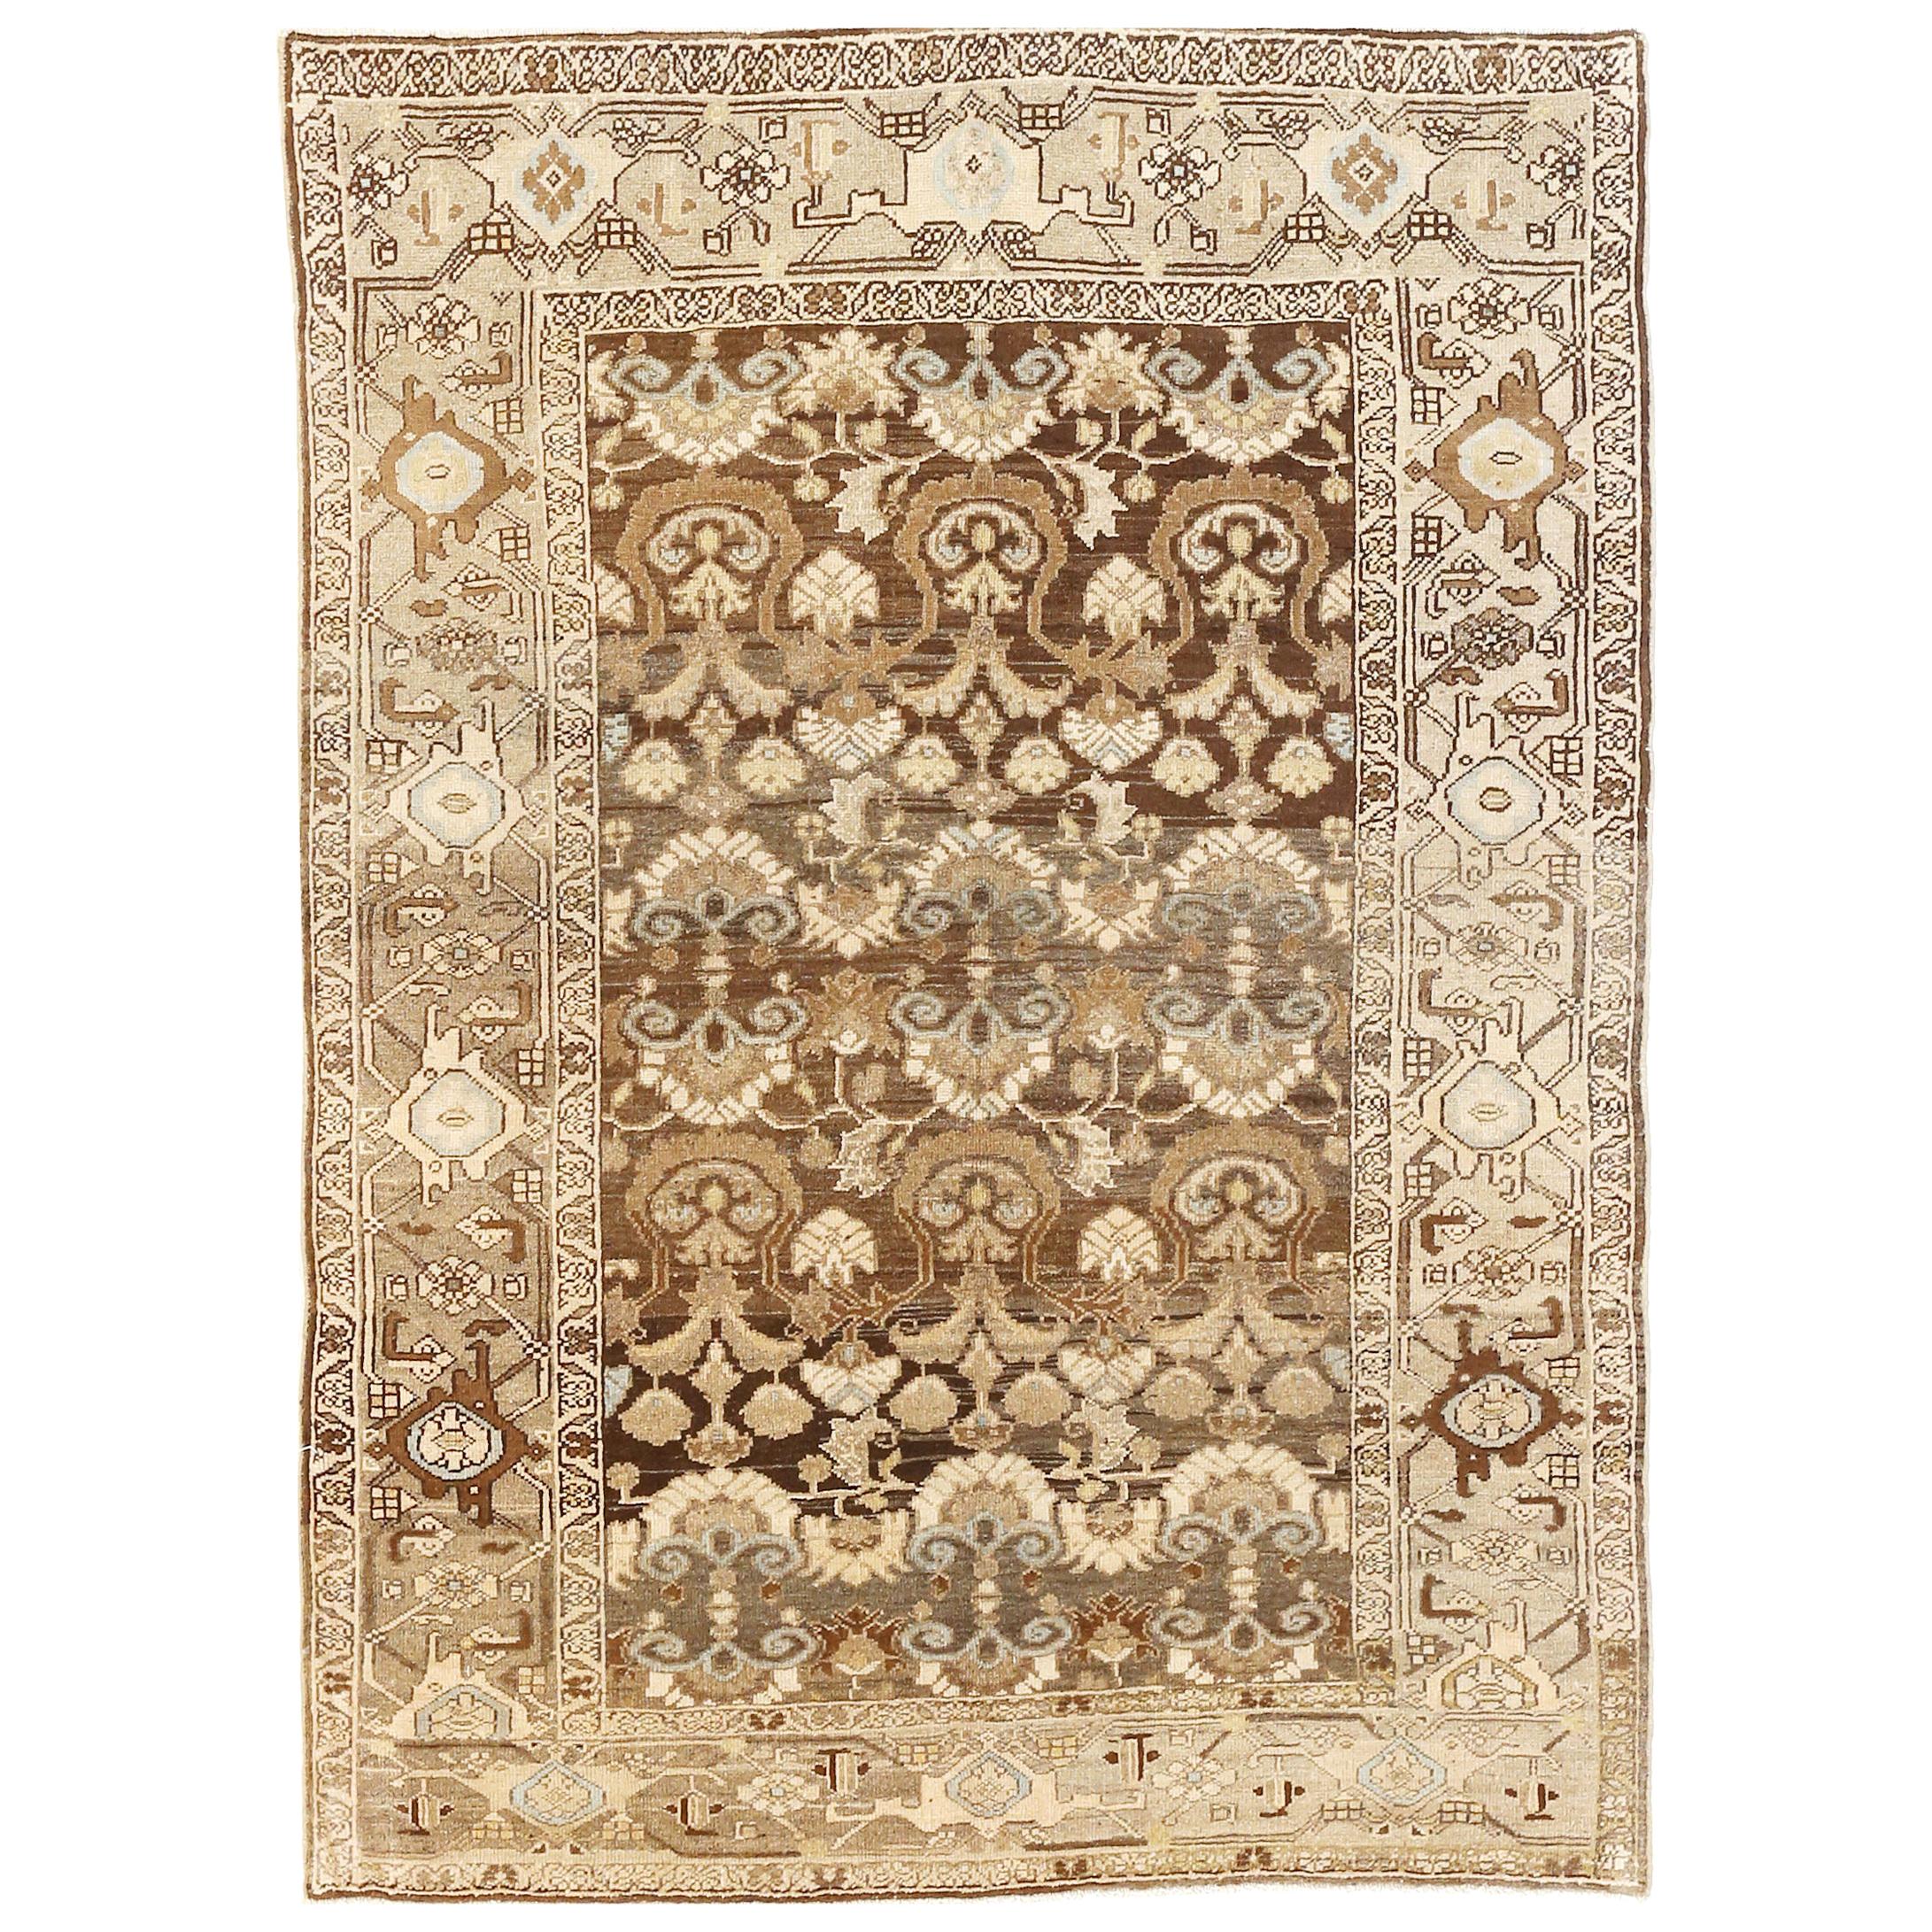 Antique Persian Gholtogh Rug with Brown & Beige Botanical Details on Ivory Field For Sale